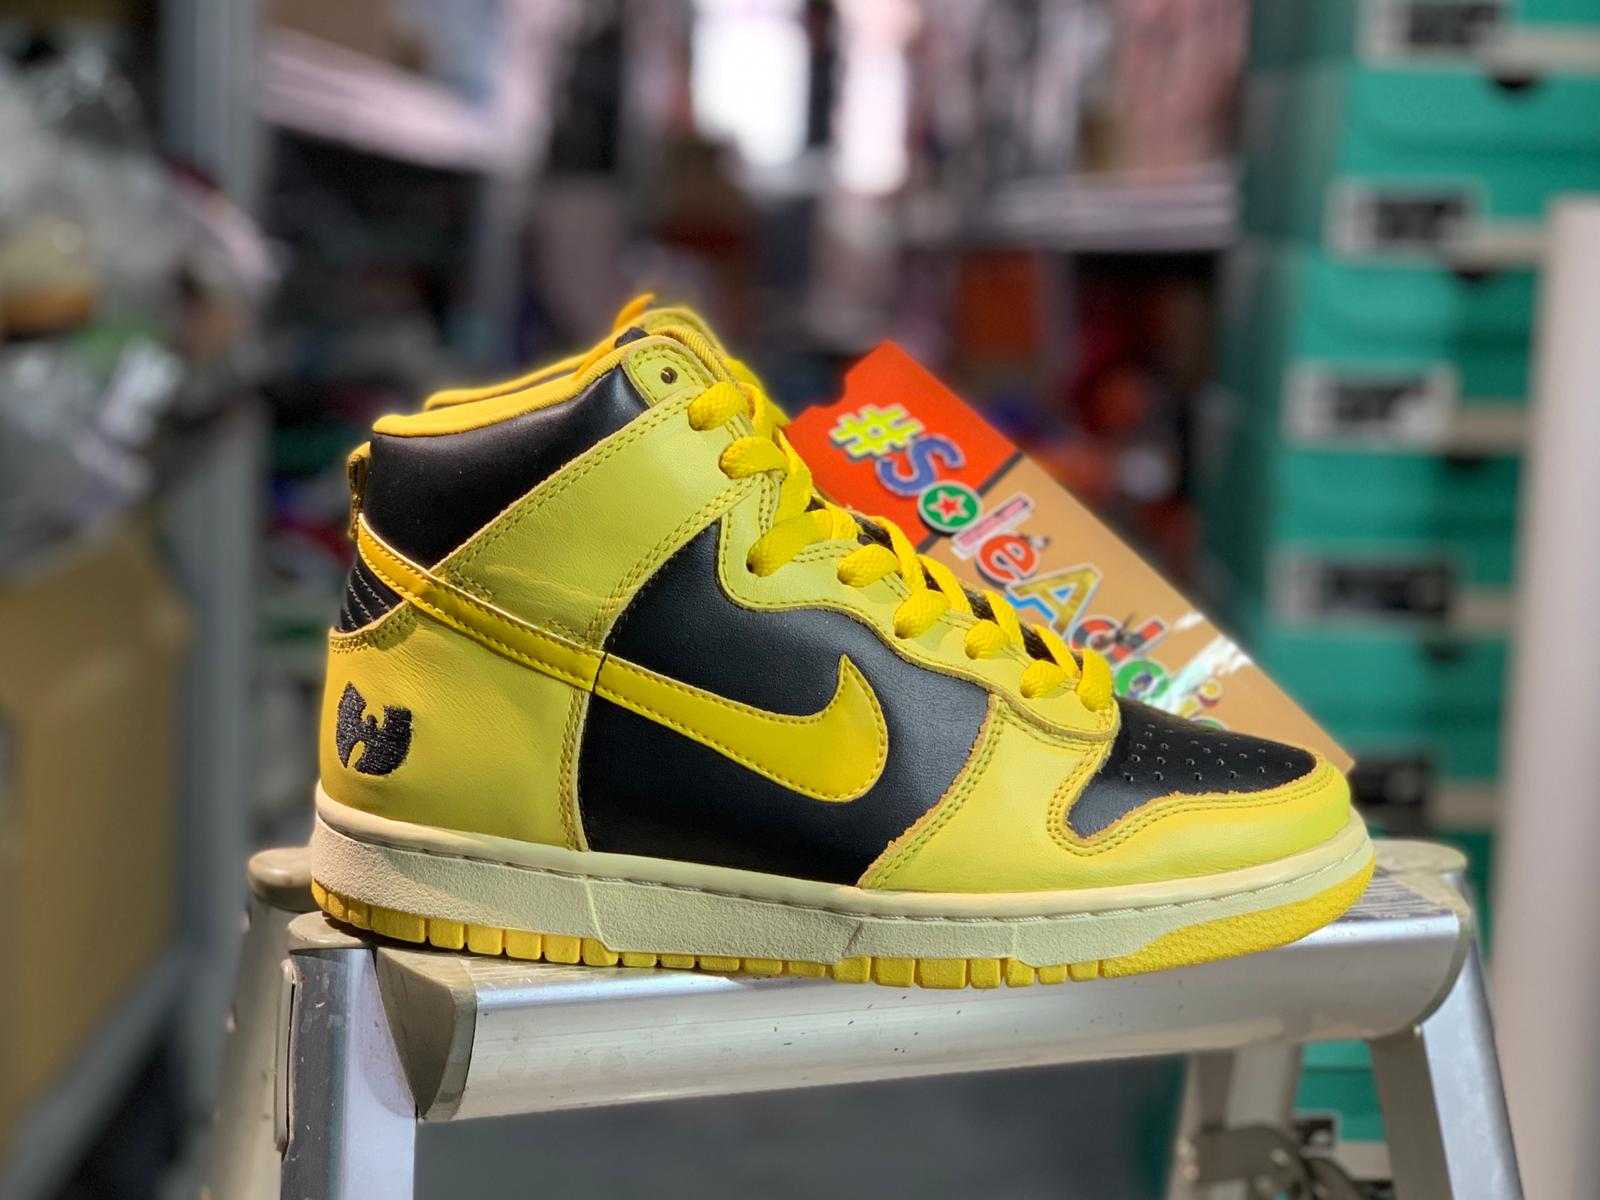 SAMPLE DS Nike Dunk High LE Pro SB "WUTANG" 1 of 36 SoleAddicttUNDS